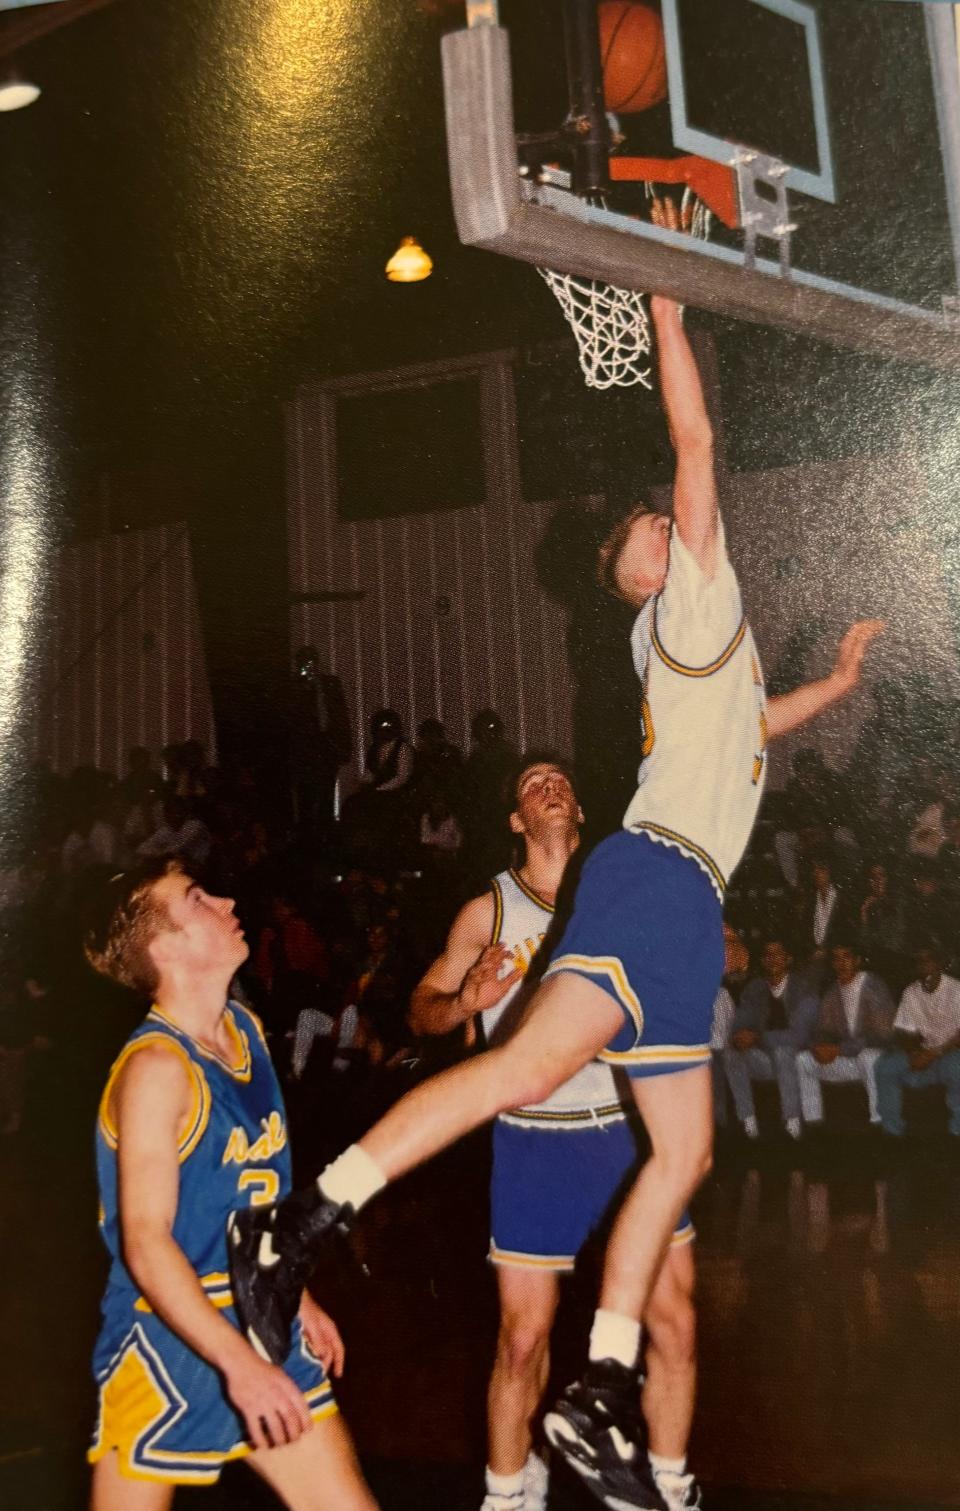 Nate Oats (right) jumps to put in a layup his senior year of high school in 1992. He played for Maranatha Baptist Academy in Watertown, Wisconsin.